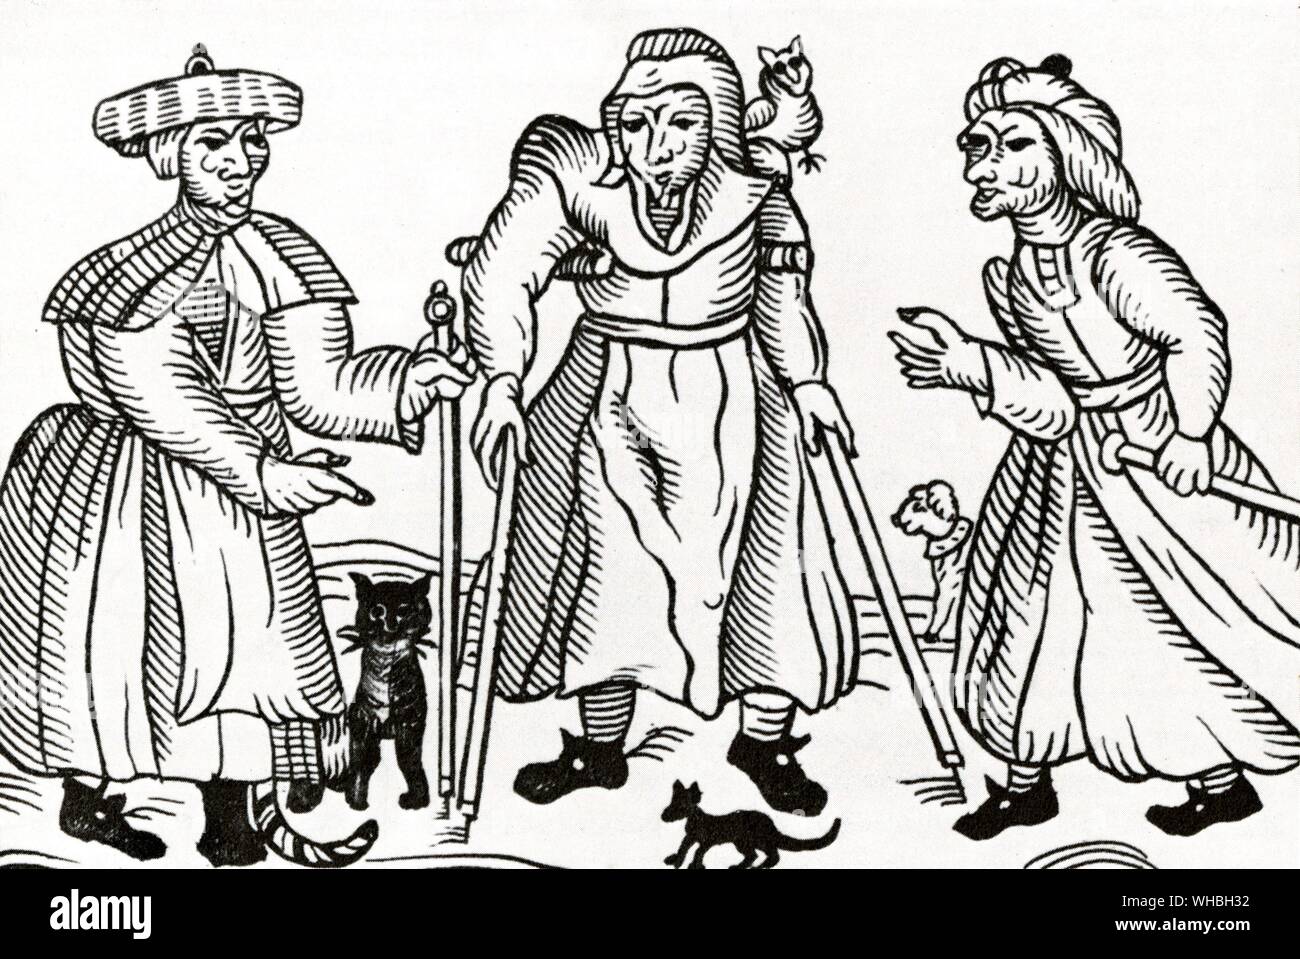 Three witches of Belvoir in a 17th century woodcut.. The Witches of Belvoir (pronounced beaver) were three women, a mother and her two daughters, accused of witchcraft in England around 1619. The mother, Joan Flower, died while in prison, and the two daughters, Margaret and Philippa, were burnt at the stake at Lincoln.. Stock Photo